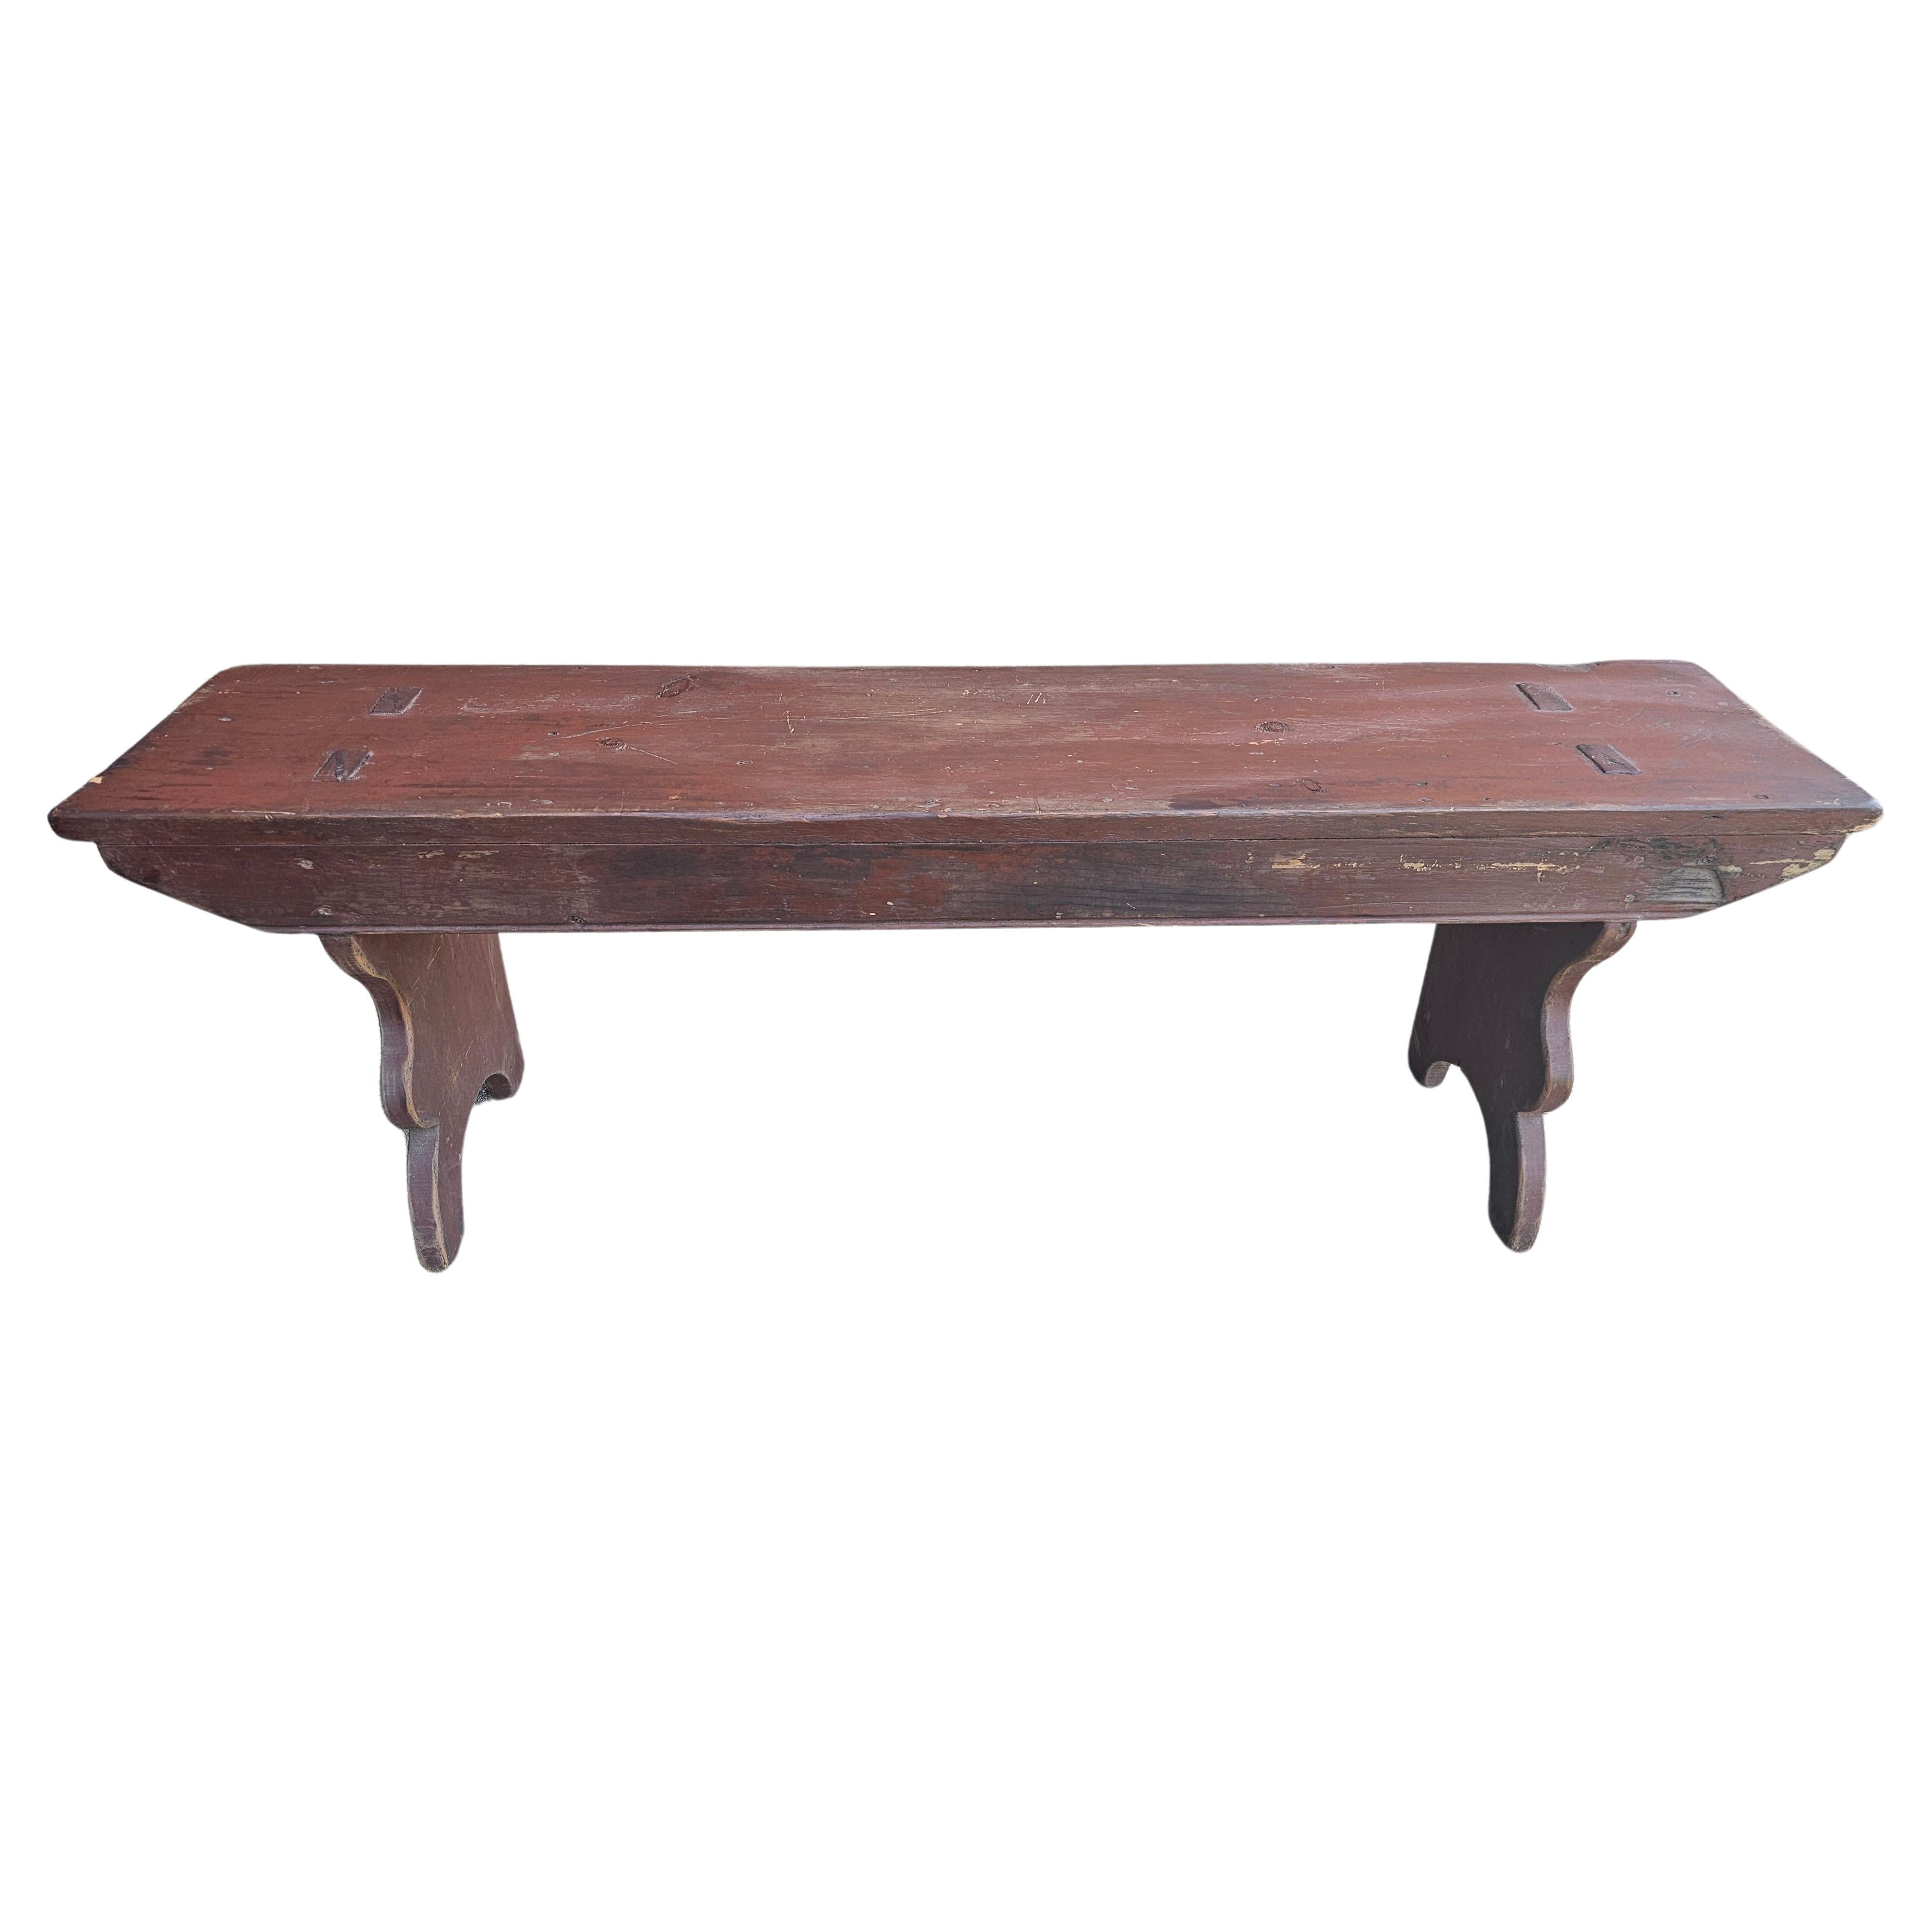 Early American Primitive Bench